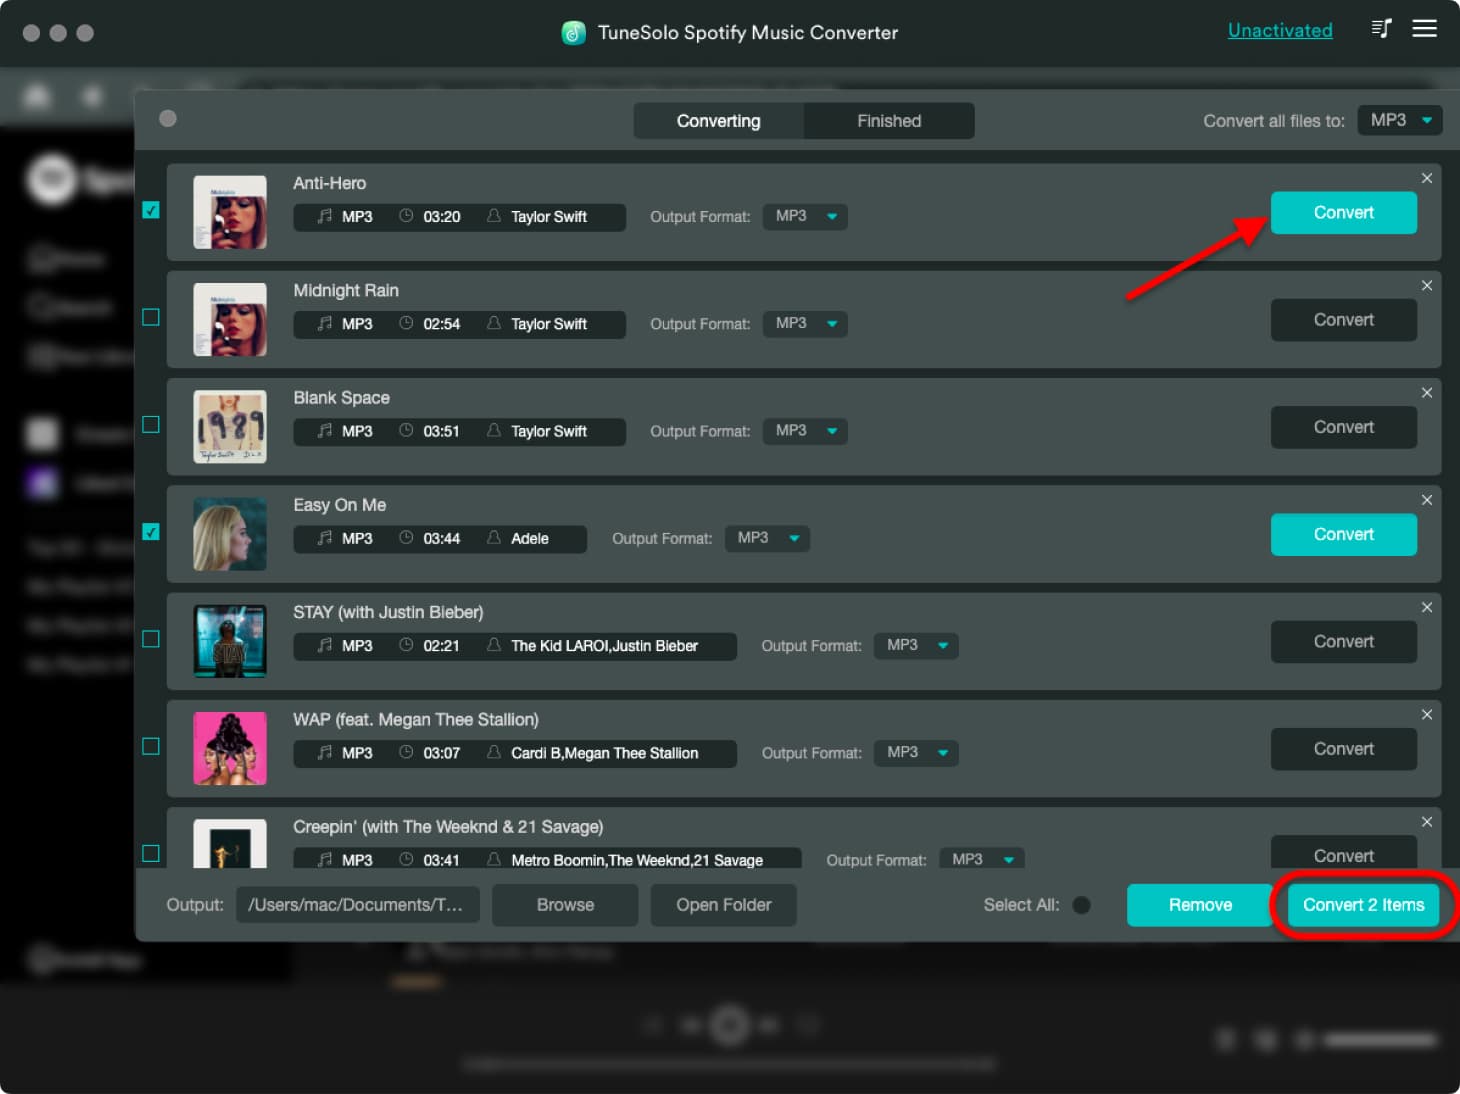 Share Spotify Music More Easily for Offline Playback